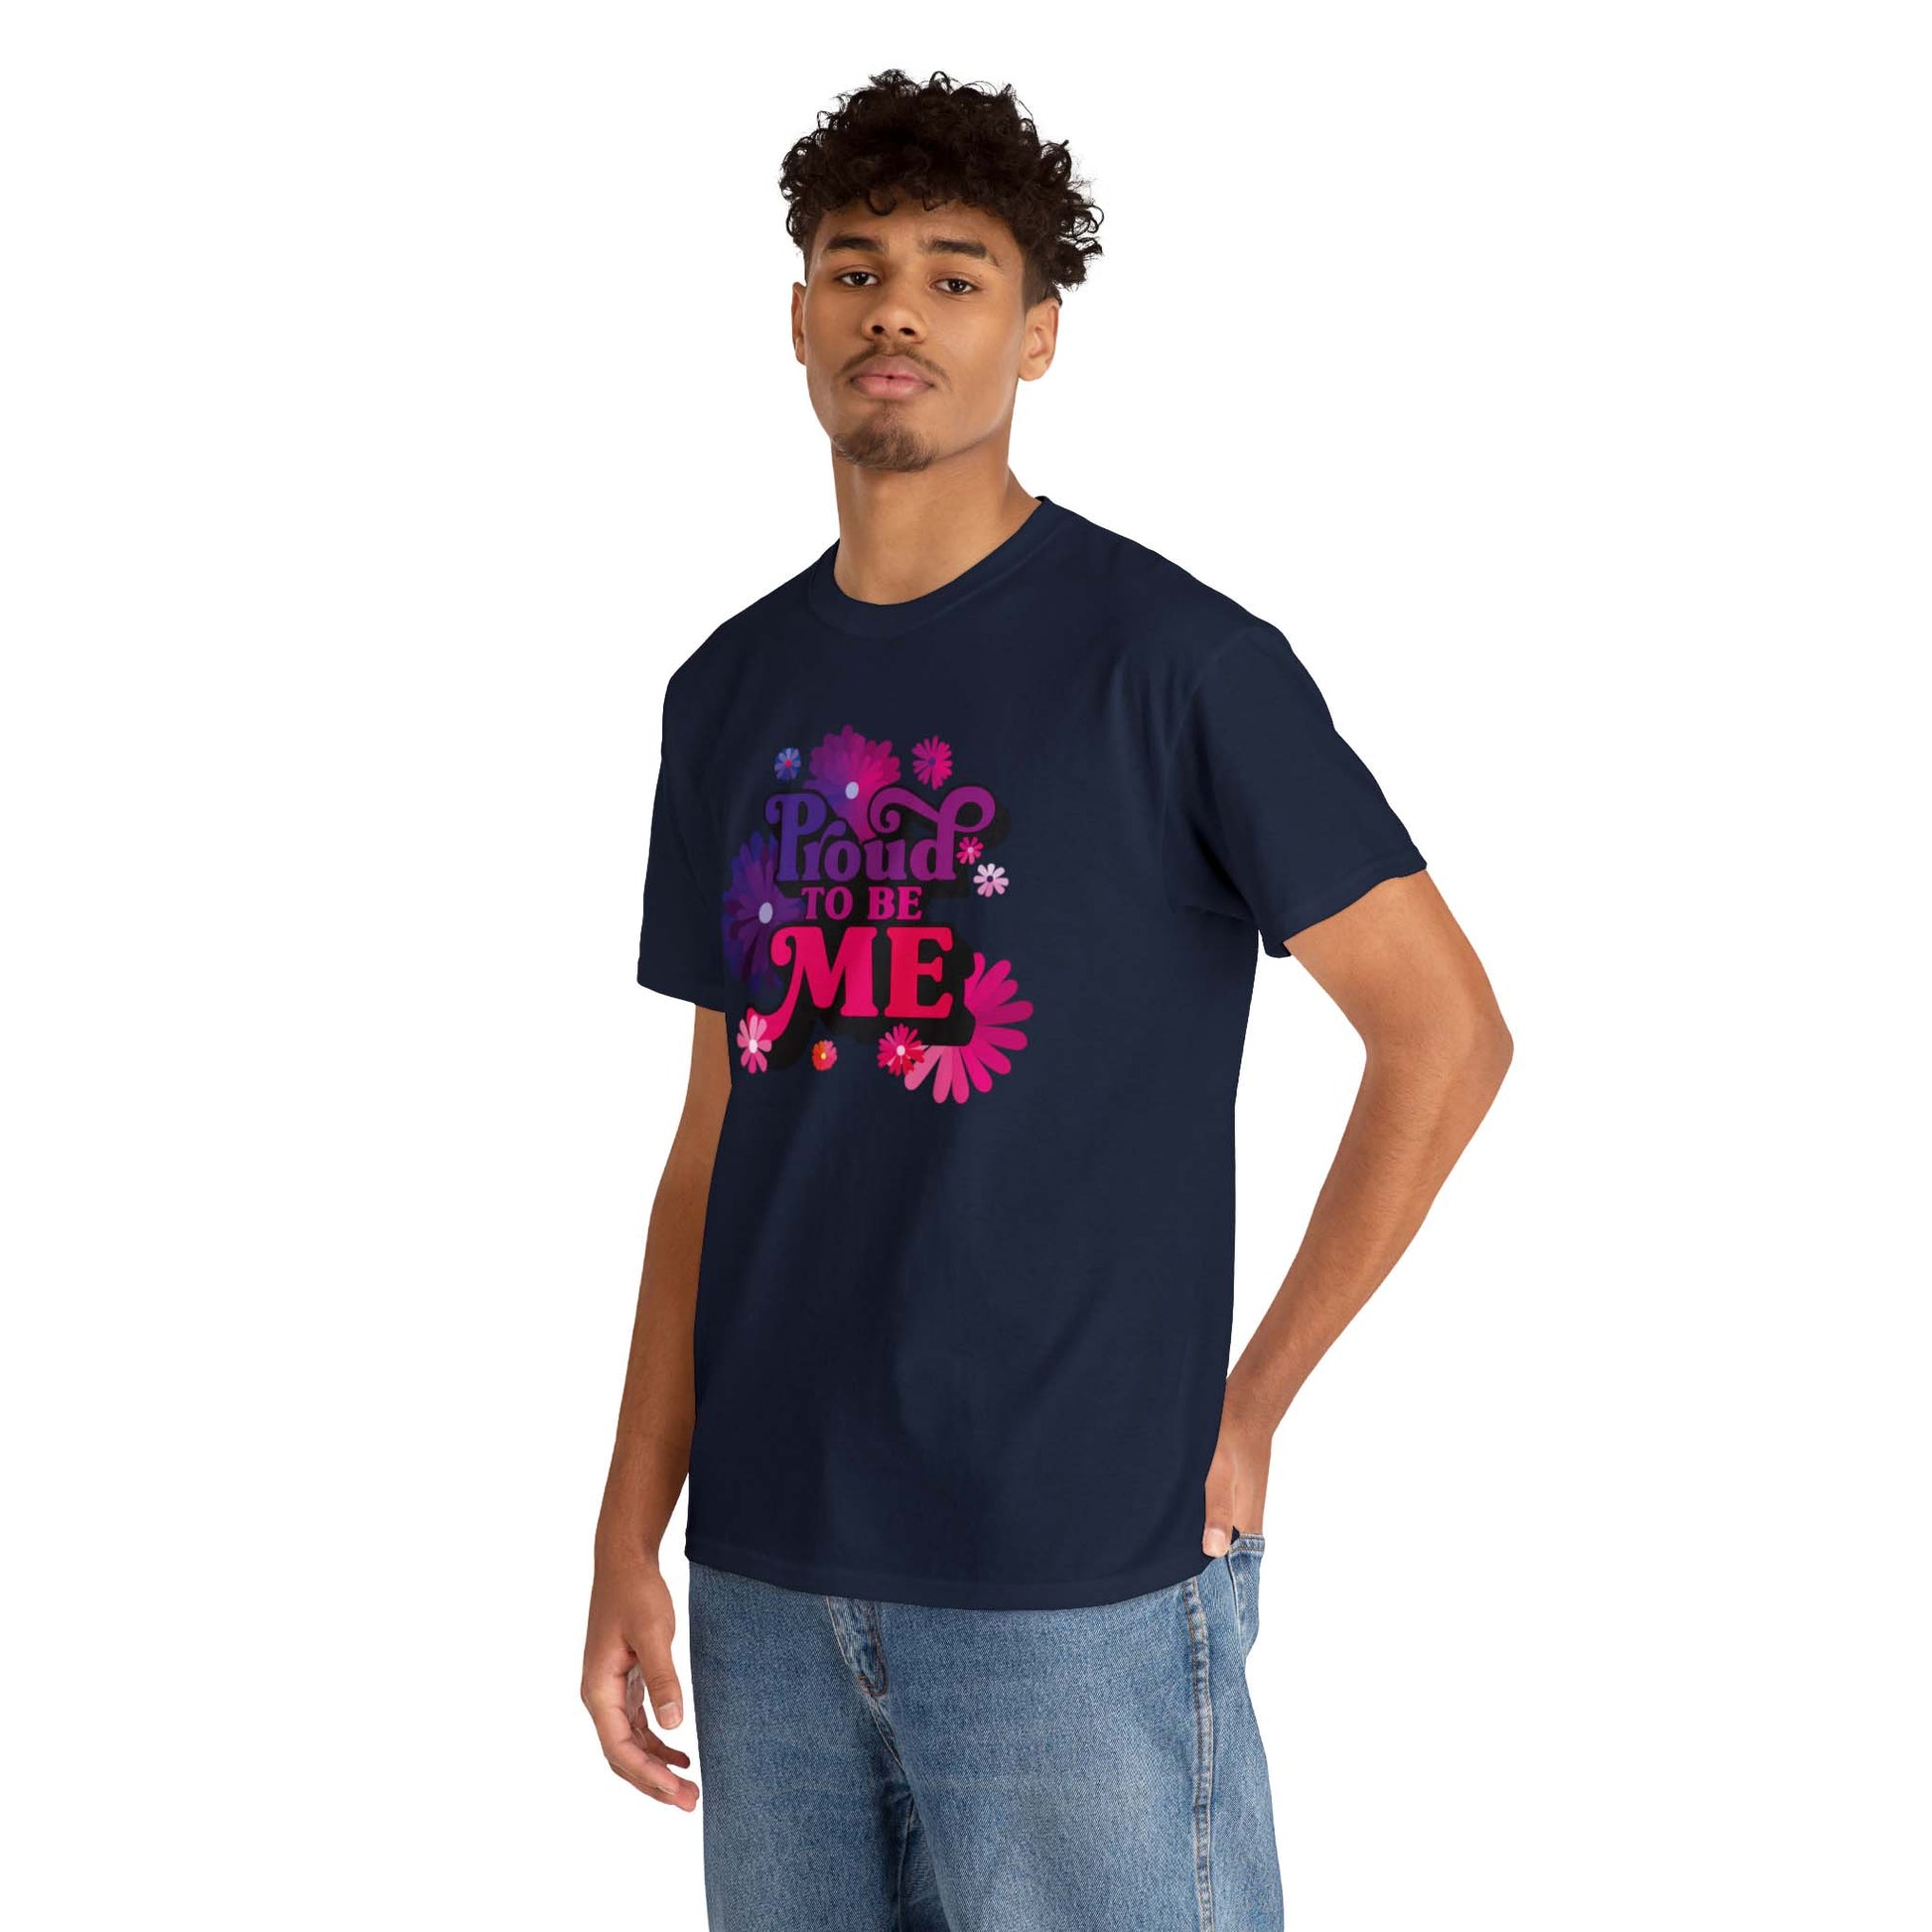 Make a statement with this navy tee for men! This tee has our famous quote shown at the front of the tee: PROUD TO BE ME! This tee can only be worn by men who are proud to be themselves.